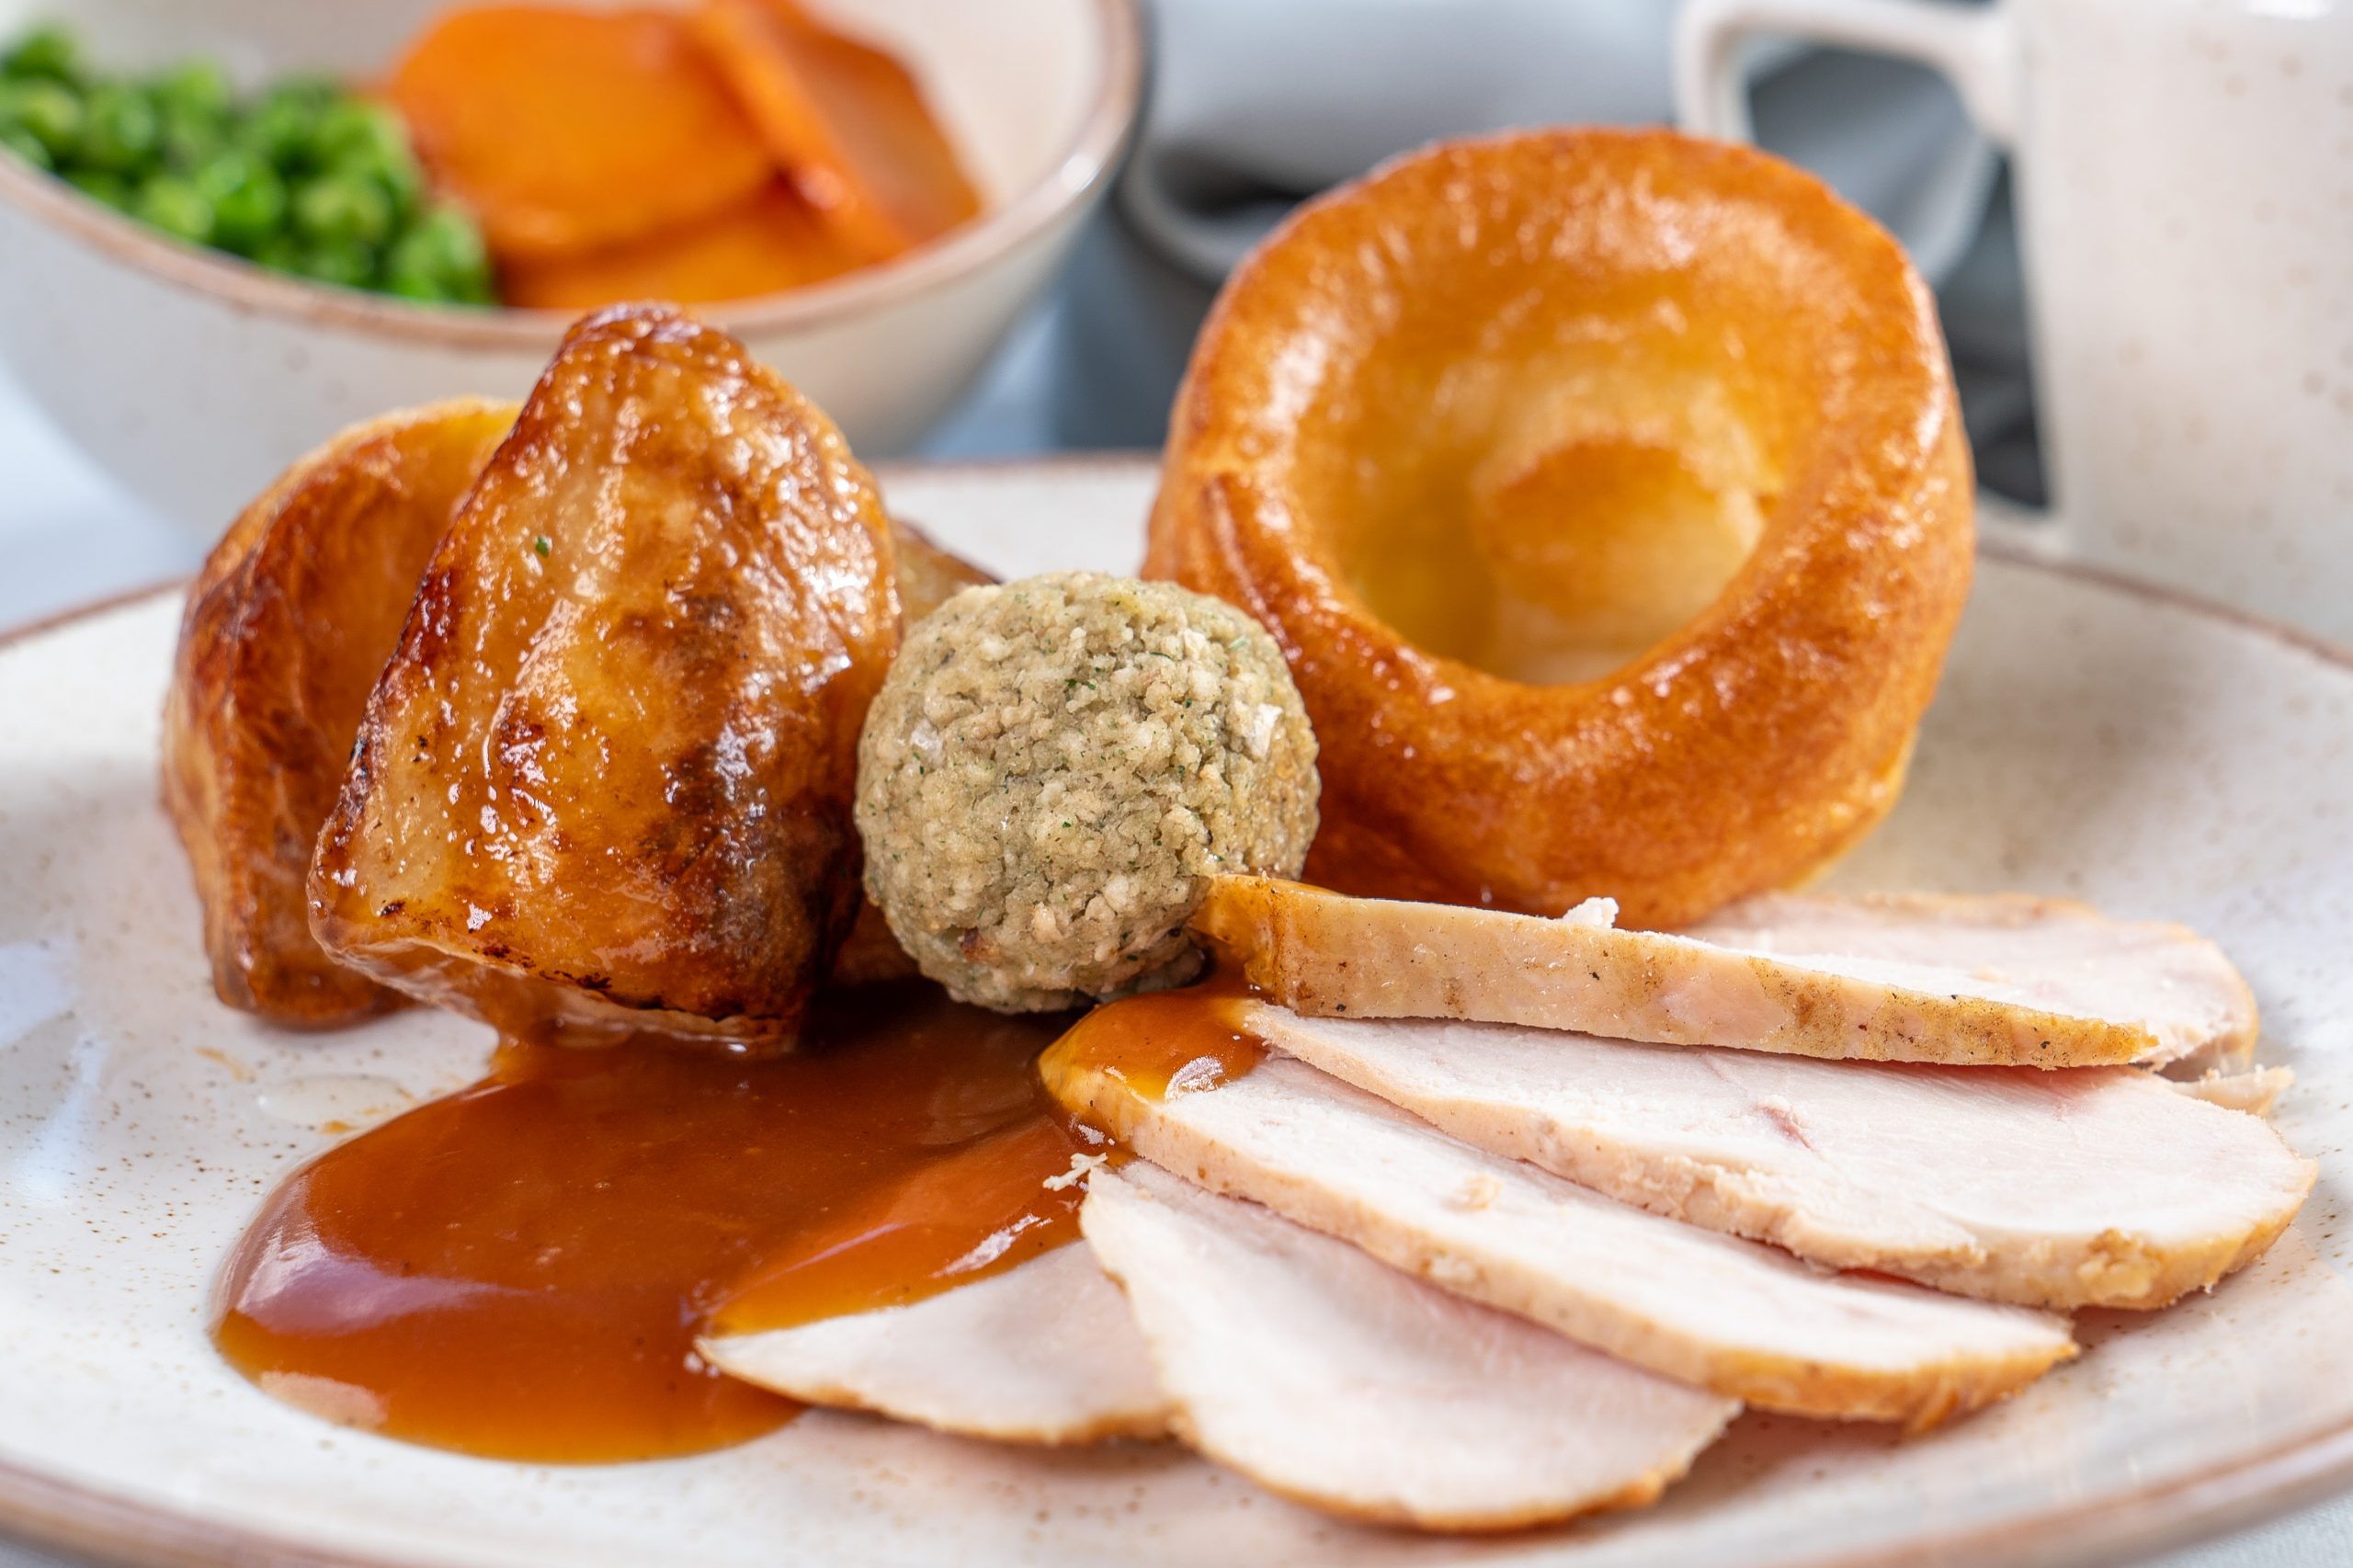 Roast Pork with Stuffing and Yorkshire Pudding